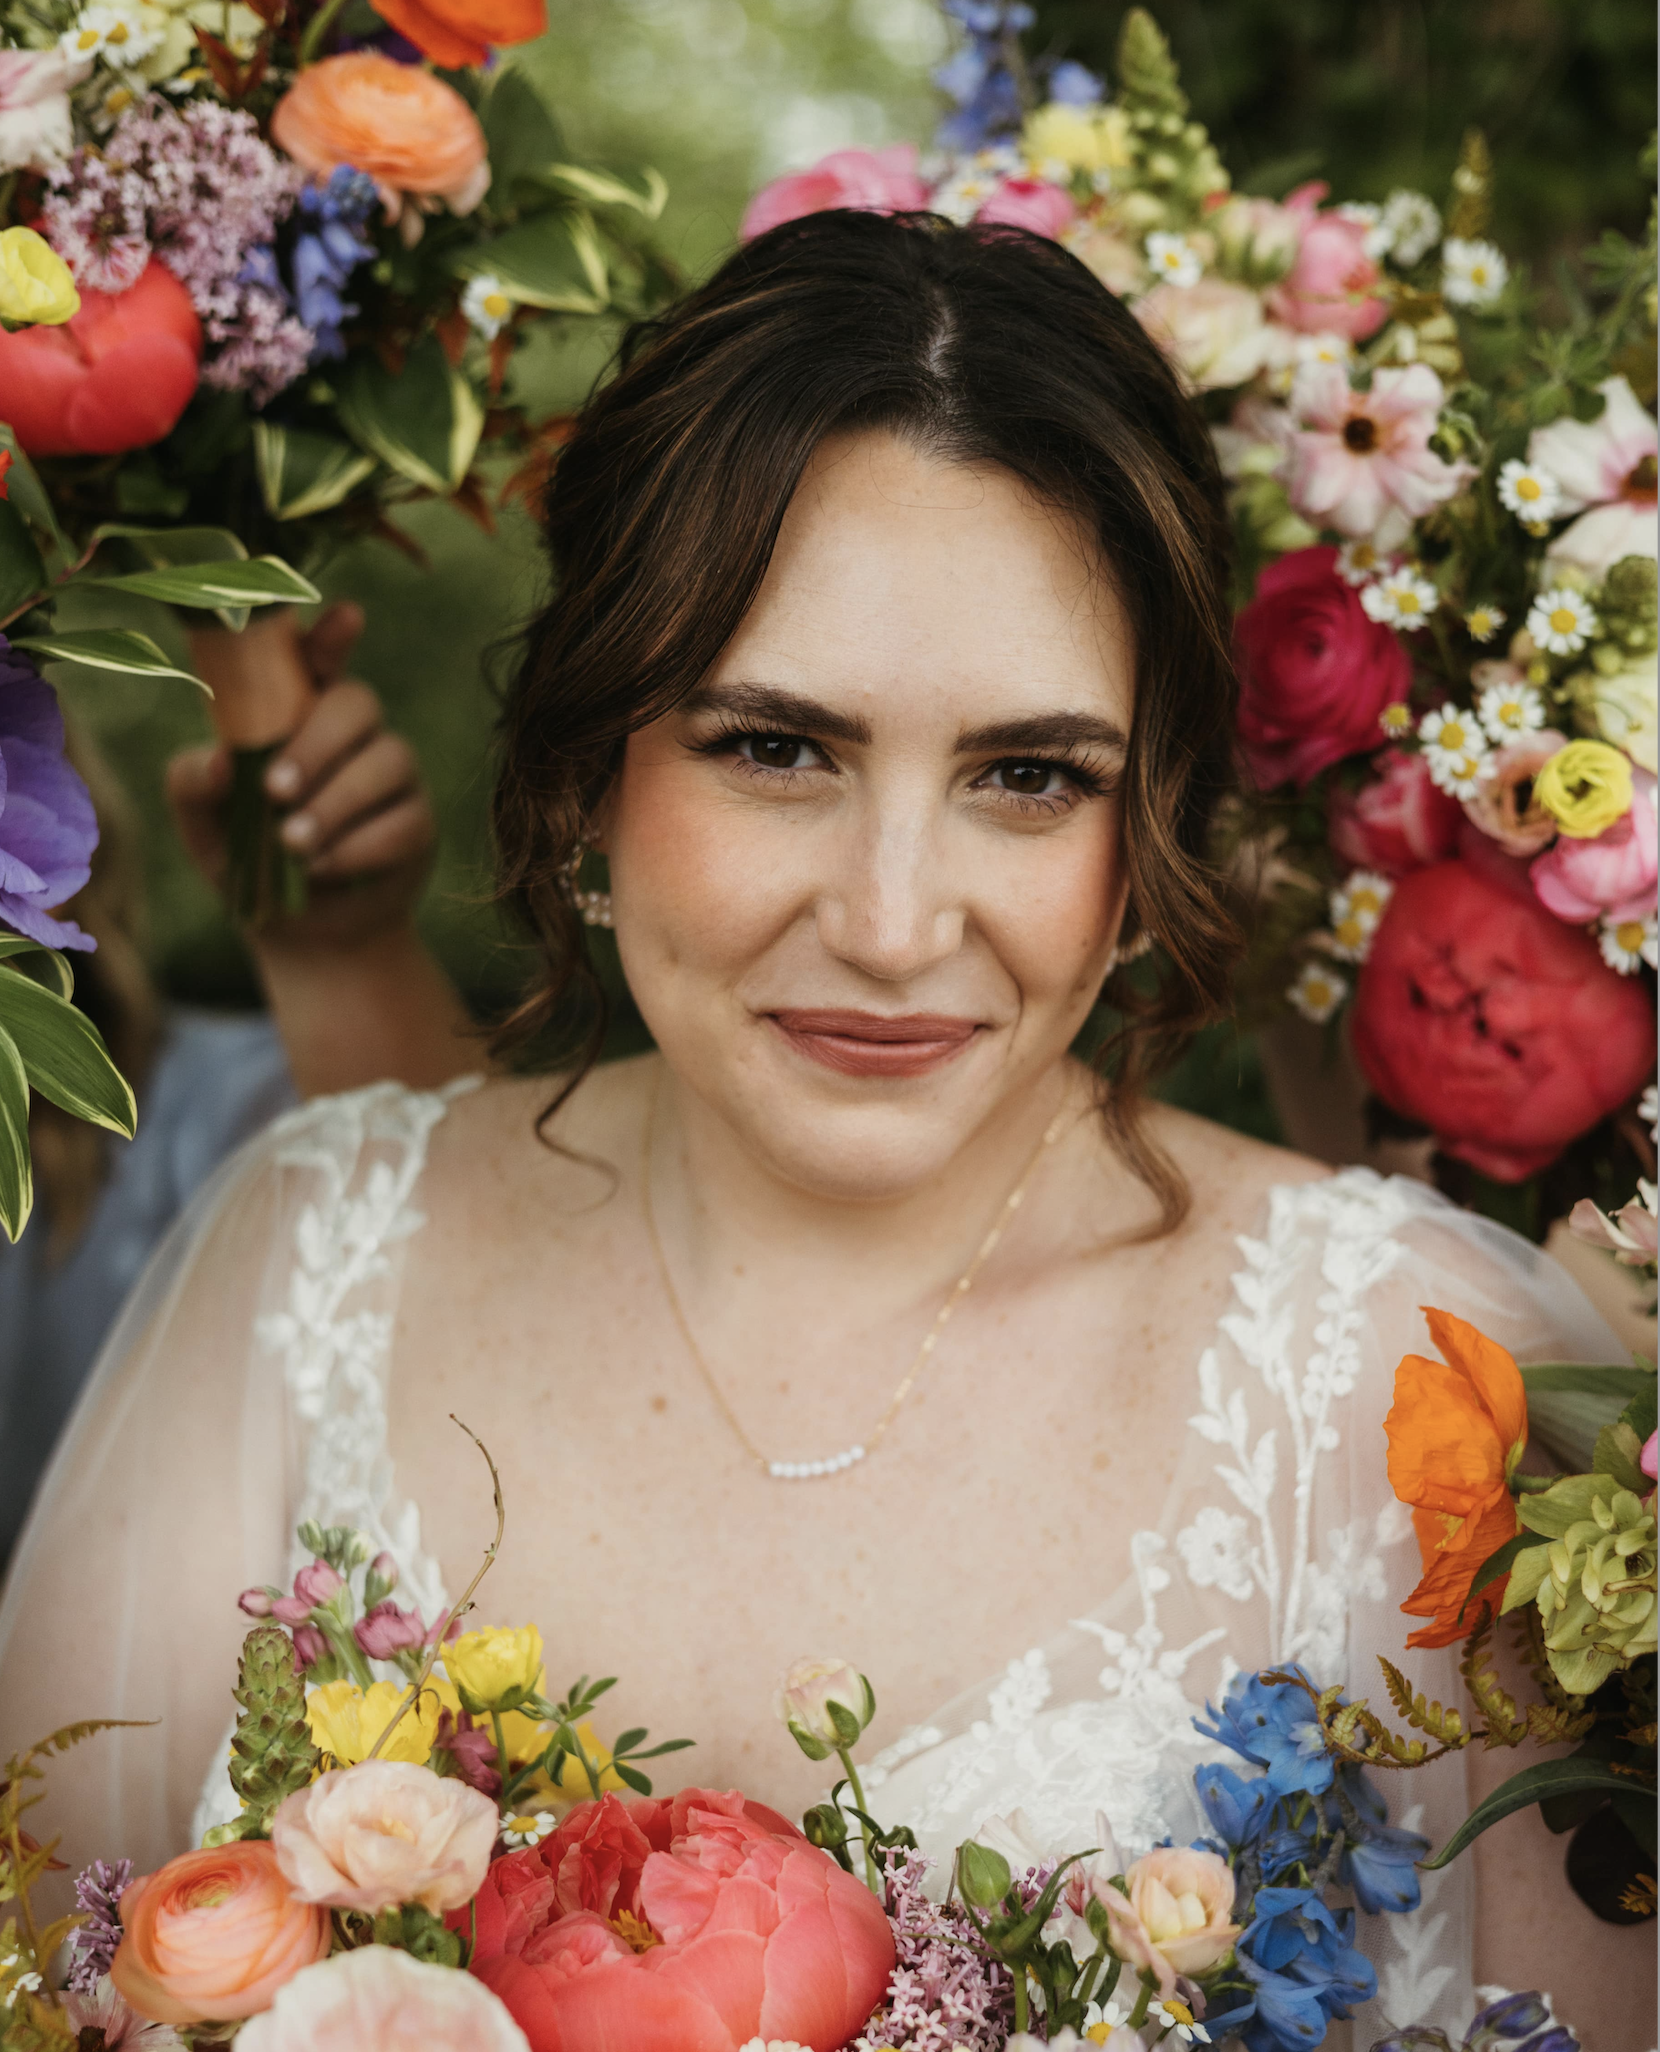 A bride smiles while surrounded by wildflowers at the Stonehouse at Silver Creek in Kentucky.